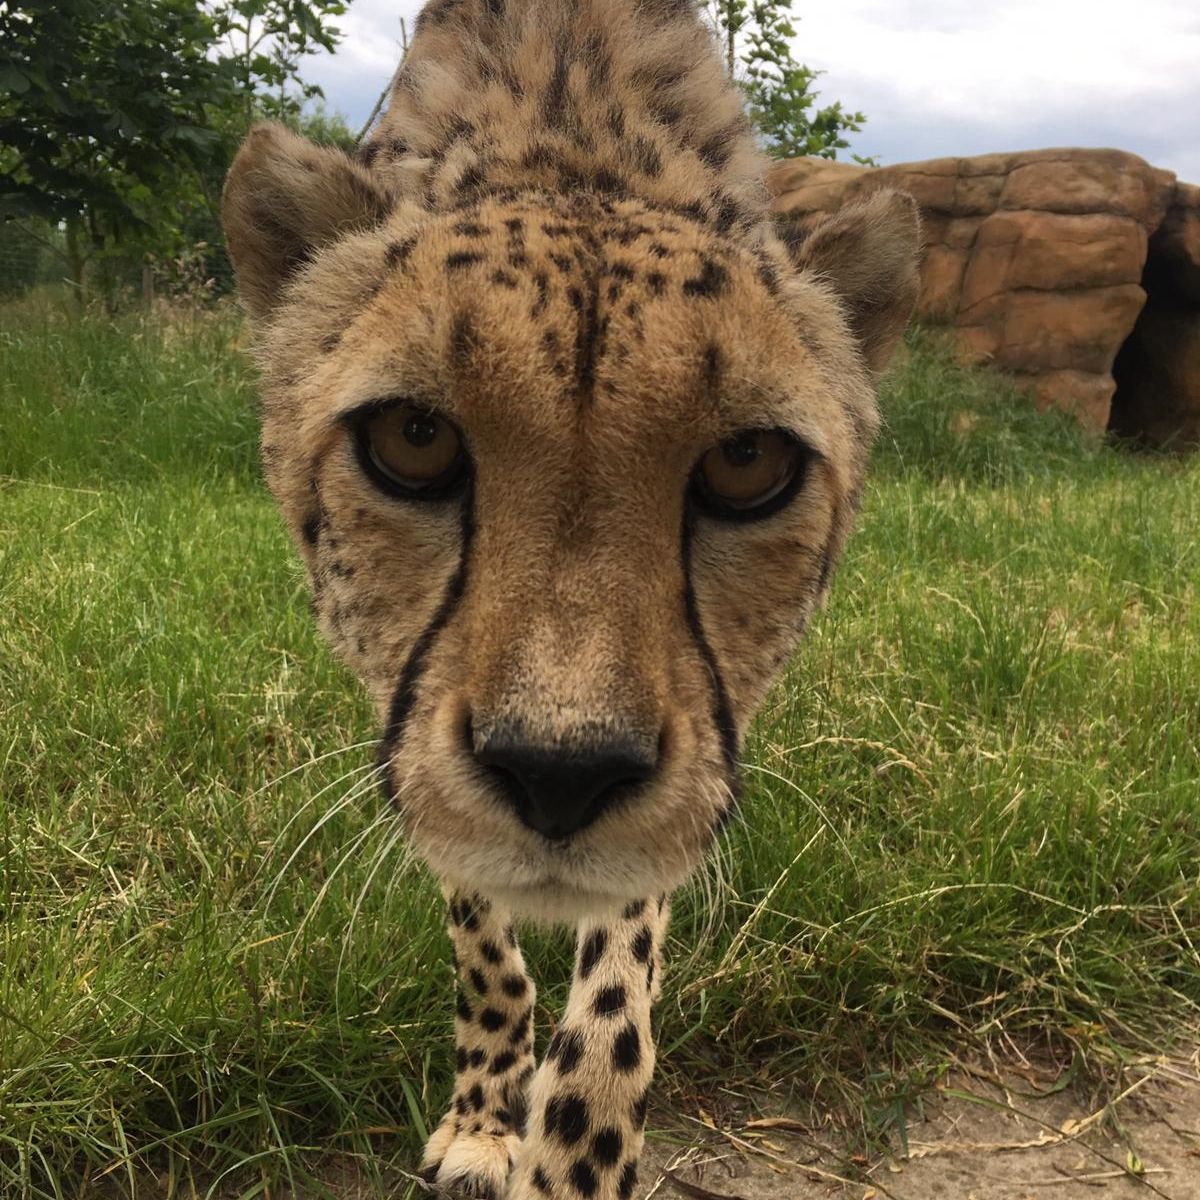 #Didyouknow that the black stripes on a Cheetah's face are thought to act as sunglasses, protecting their eyes from the sun’s glare? Murphy's rather handsome face demonstrates this perfectly! 🕶️ #WednesdayWisdom #BCSDidYouKnow #cheetah #thebigcatsanctuary